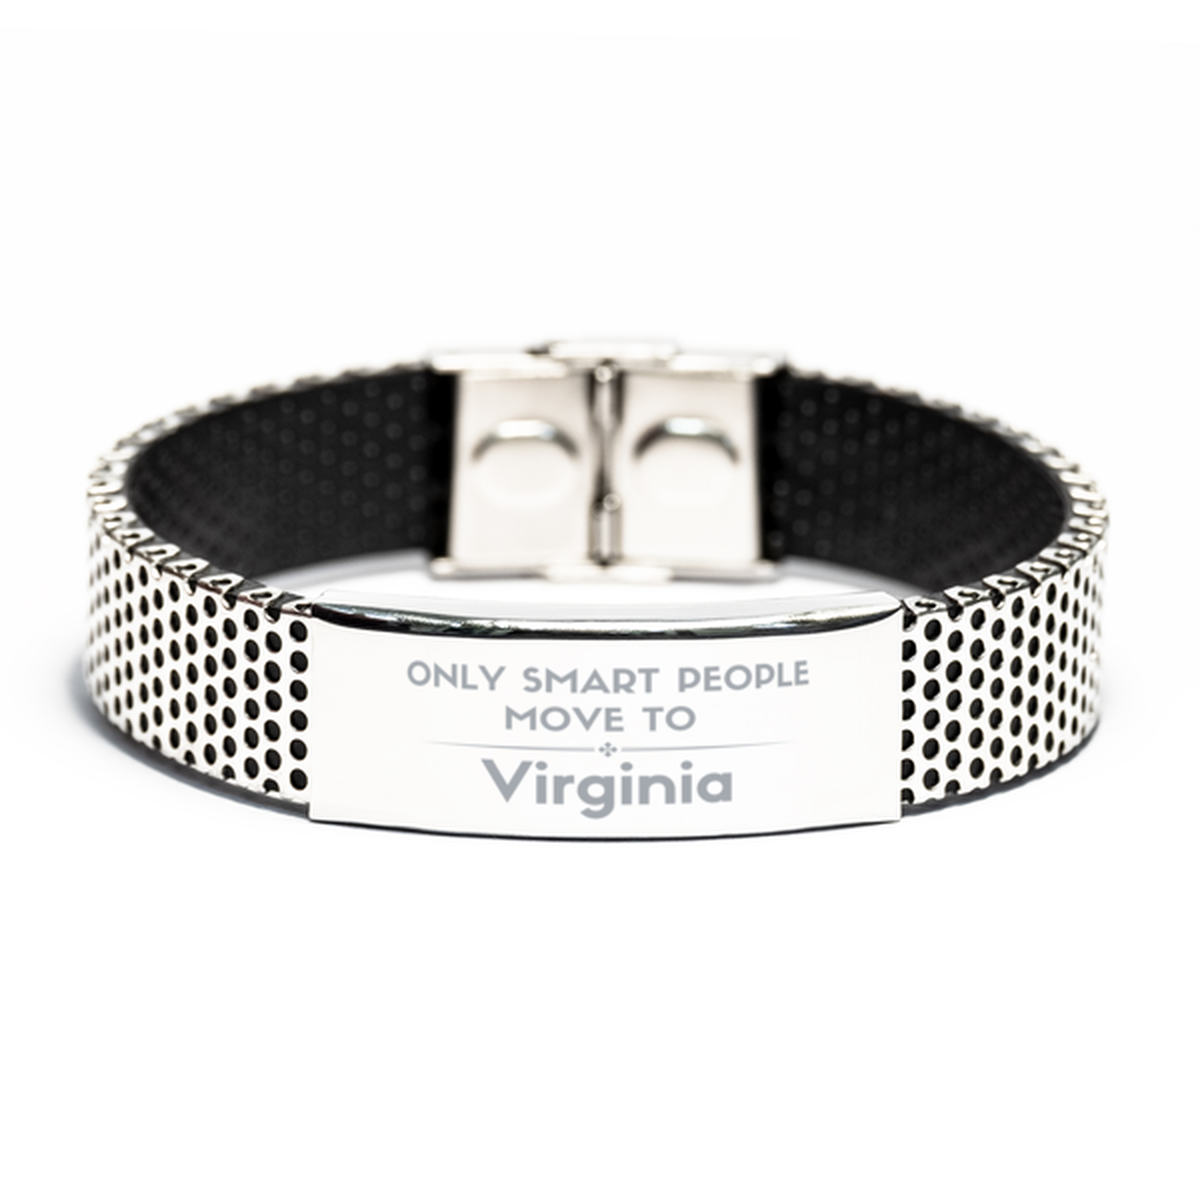 Only smart people move to Virginia Stainless Steel Bracelet, Gag Gifts For Virginia, Move to Virginia Gifts for Friends Coworker Funny Saying Quote